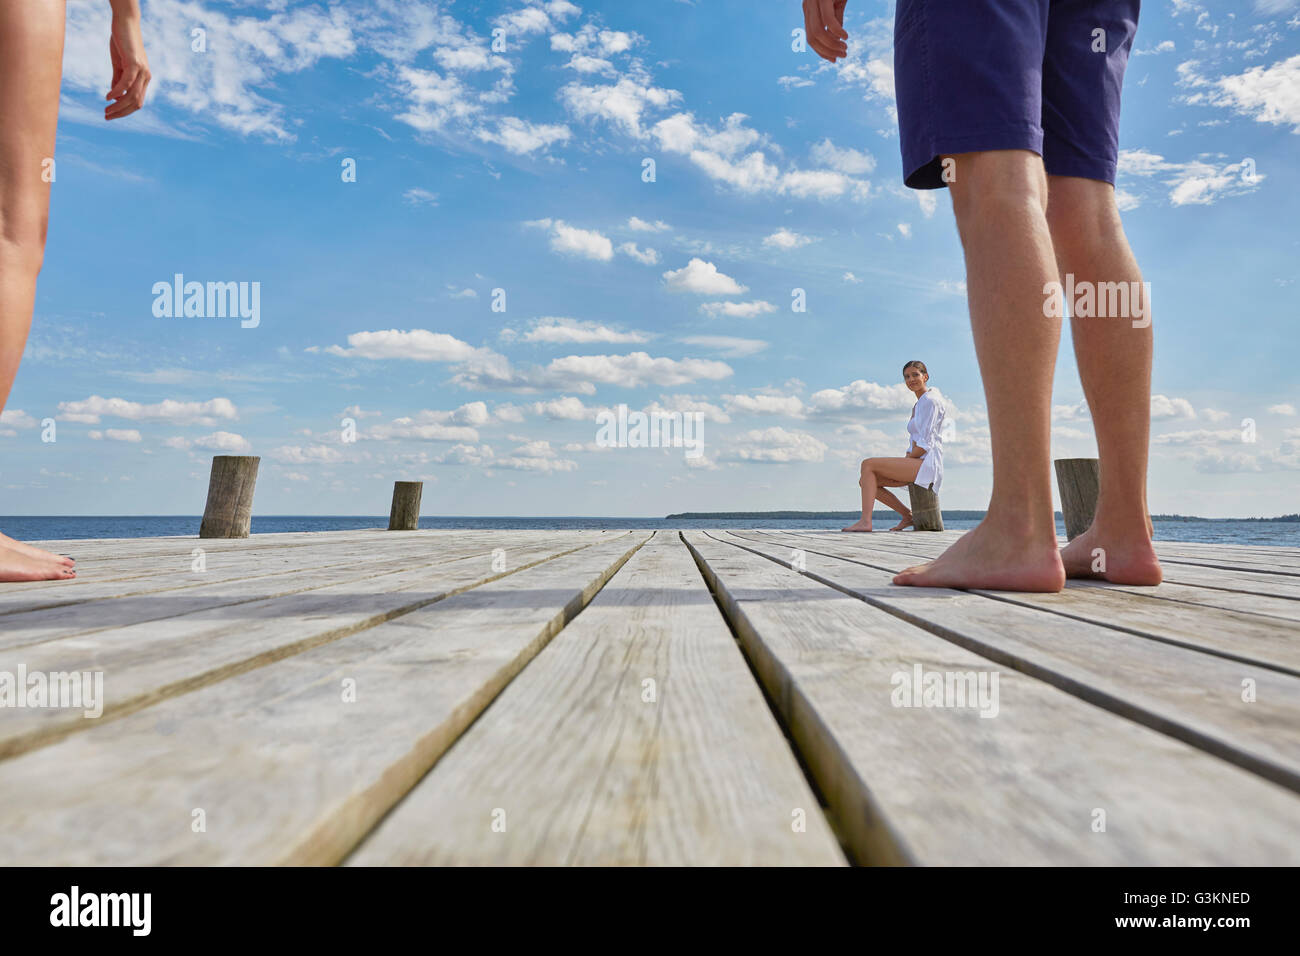 Young woman sitting on post on wooden pier, looking at friends standing further away Stock Photo